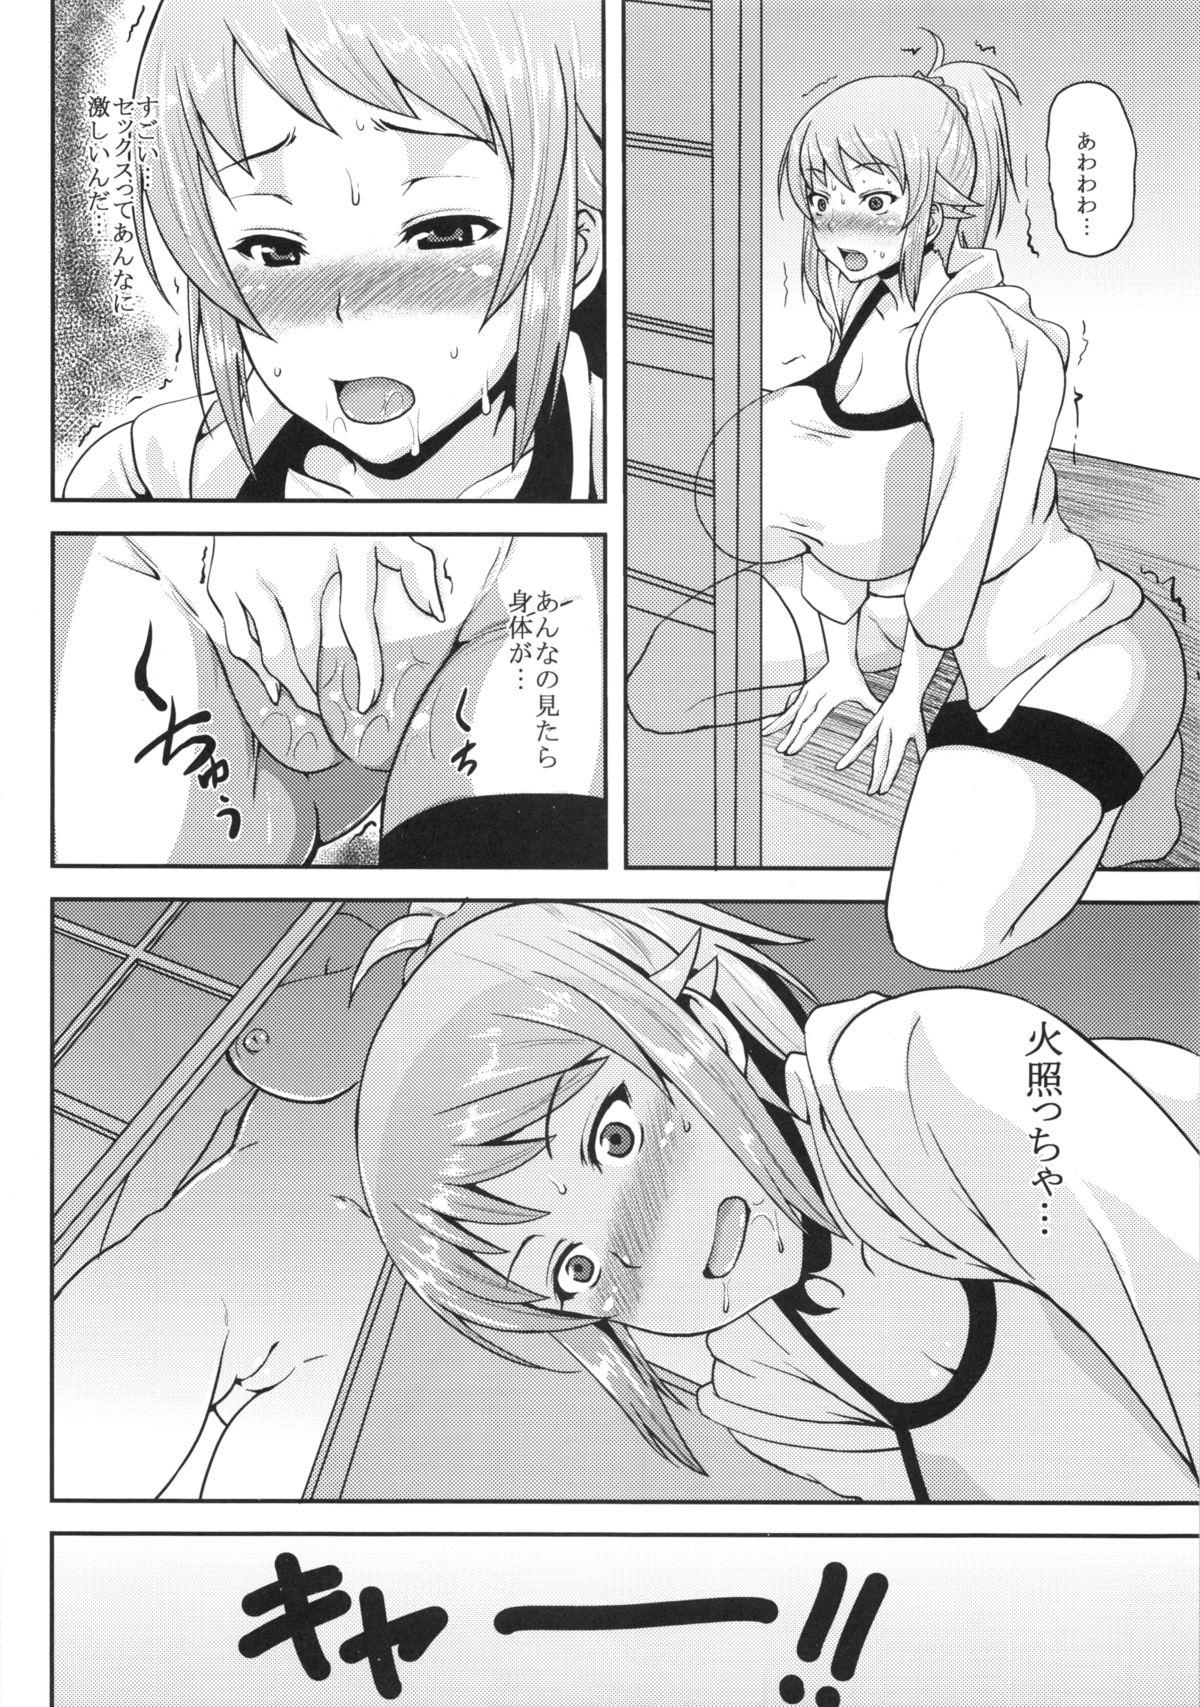 Old Young Oshiete Fumina Senpai - Gundam build fighters try Amateur - Page 7